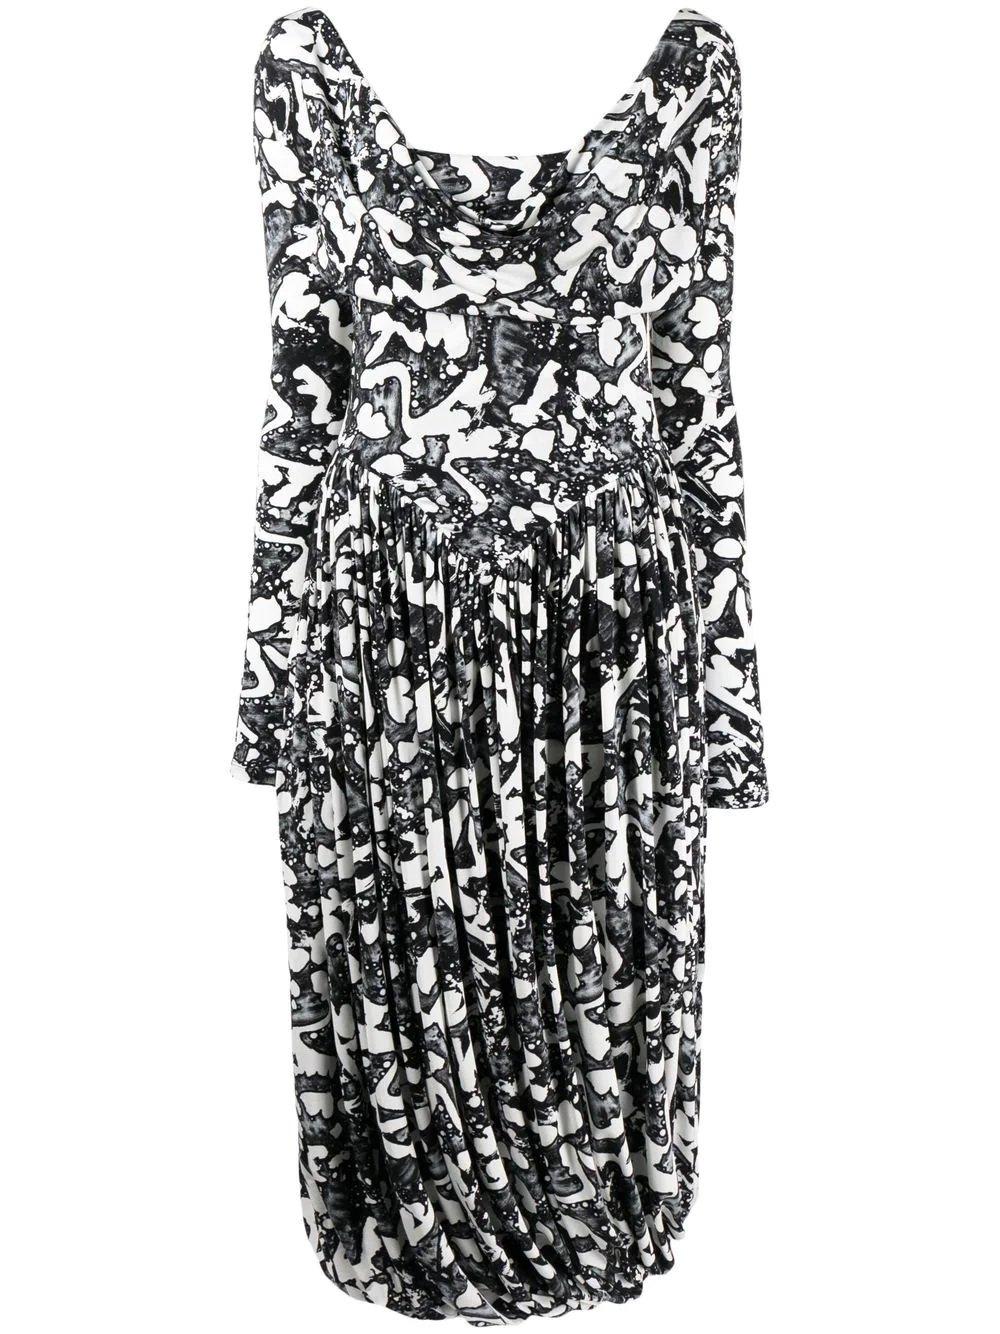 Graphic Printed Jersey Dress